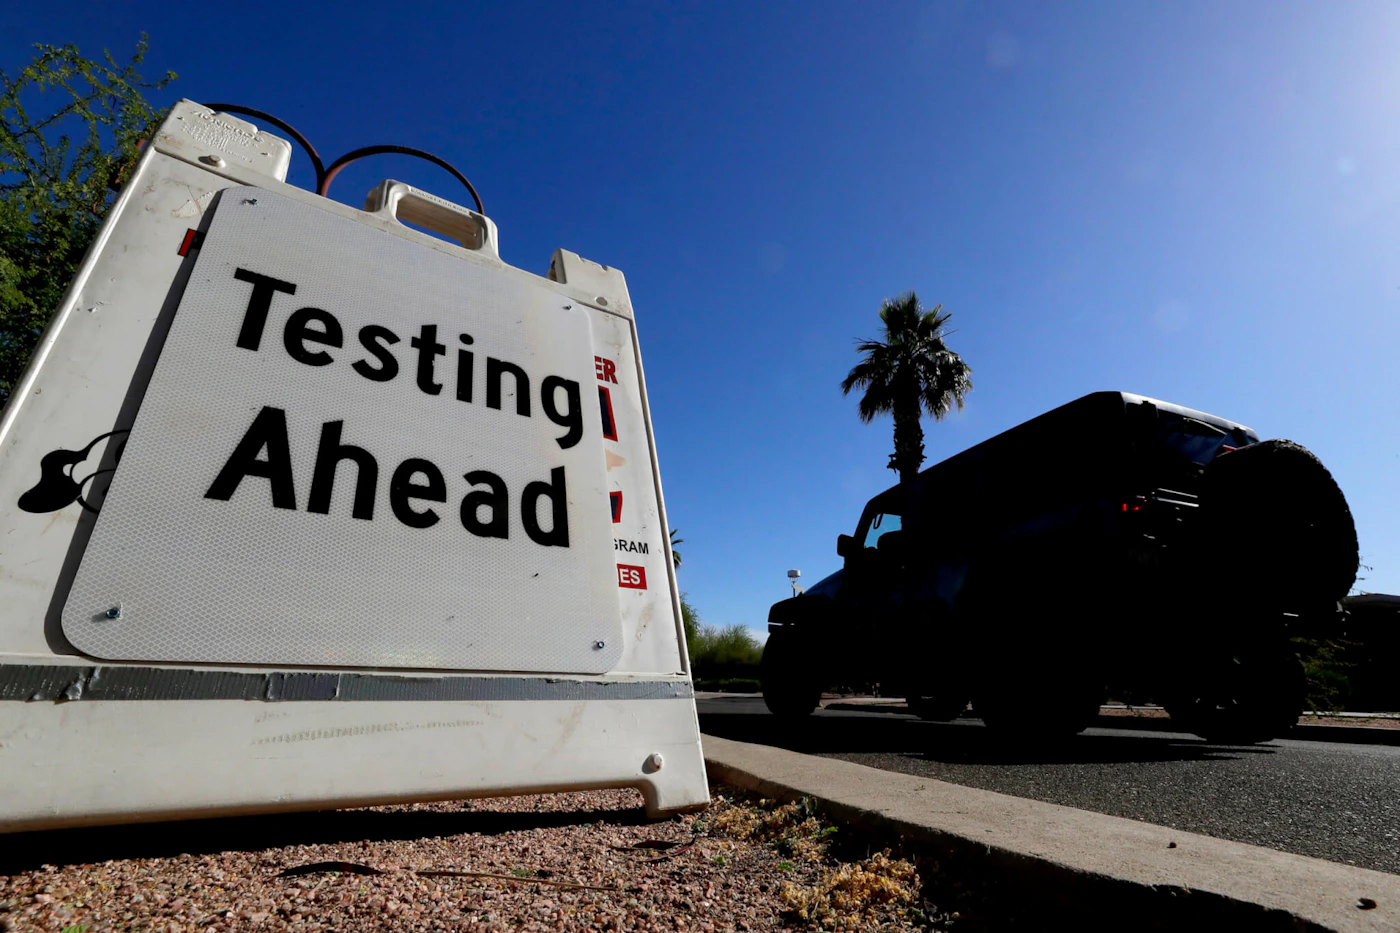 A vehicle arrives at COVID-19 testing site at Steele Indian School Park, Saturday, May 23, 2020, in Phoenix. The City of Phoenix and SonoraQuest are hosting a mobile COVID-19 testing blitz for area residents. (AP Photo/Matt York)